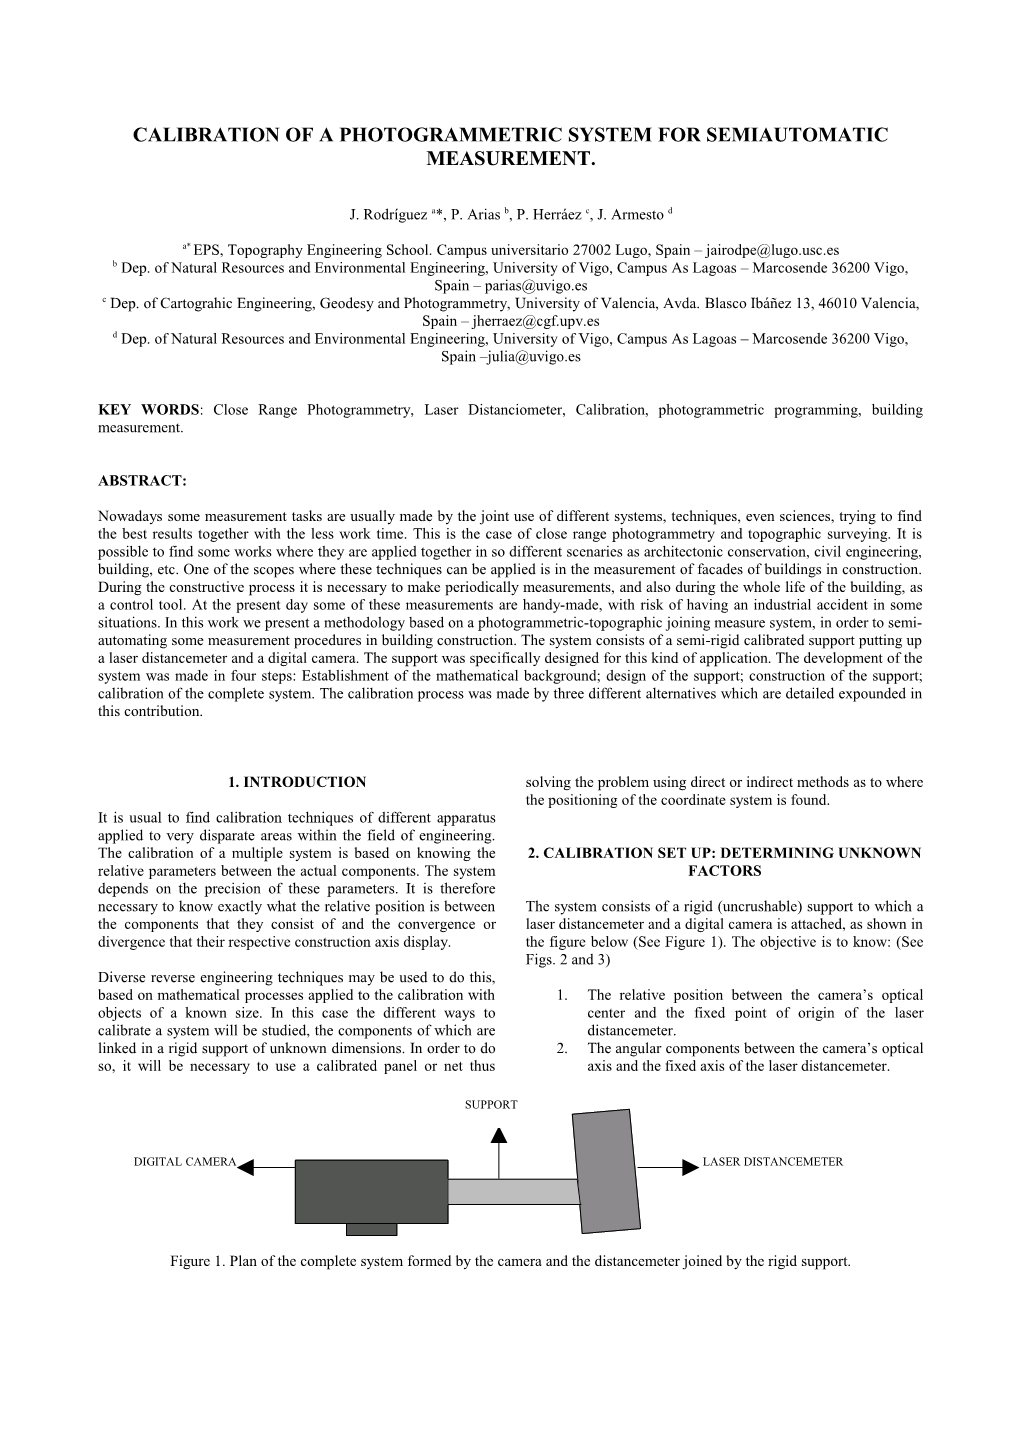 Calibration of a Photogrammetric System for Semiautomatic Measurement